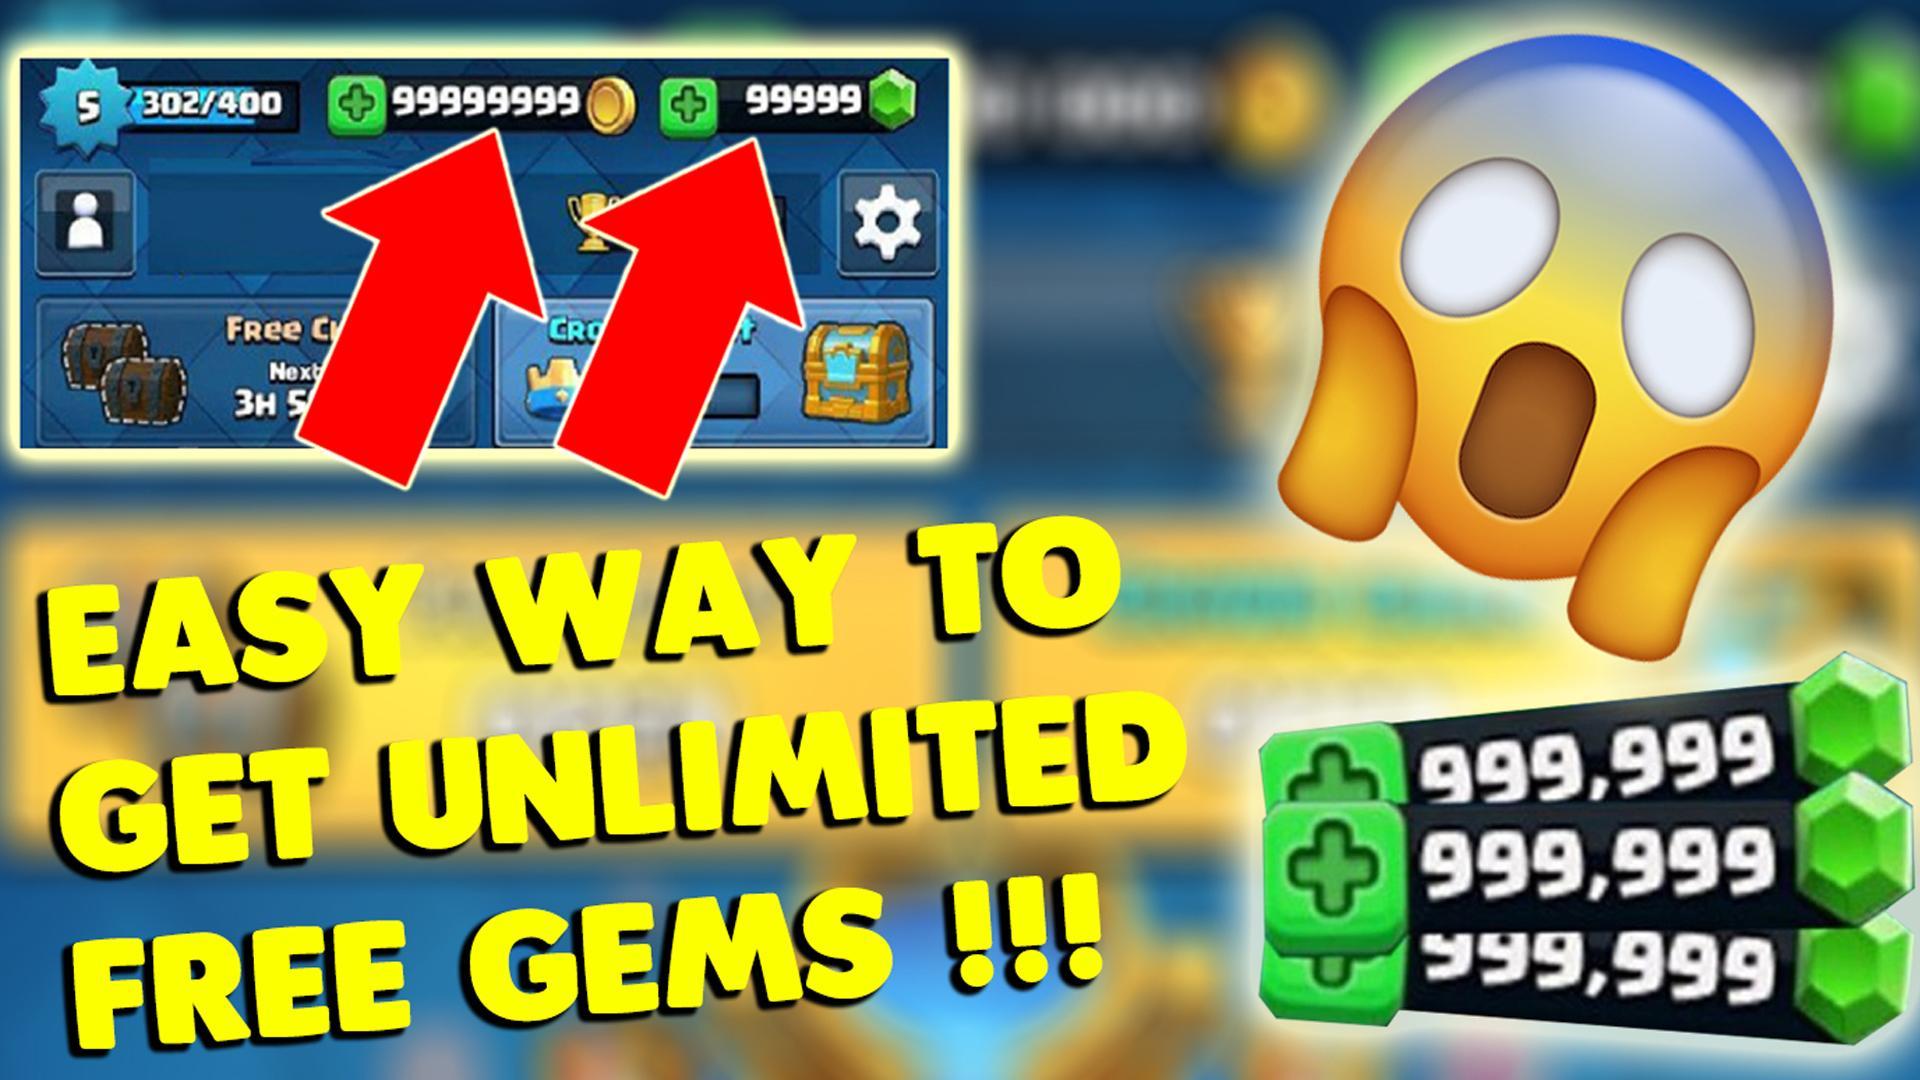 Pro Guide And Tips 2019 More Than 100m Free Gems For Android Apk Download - robux pro tips 2019 100m robux easy and free apk app